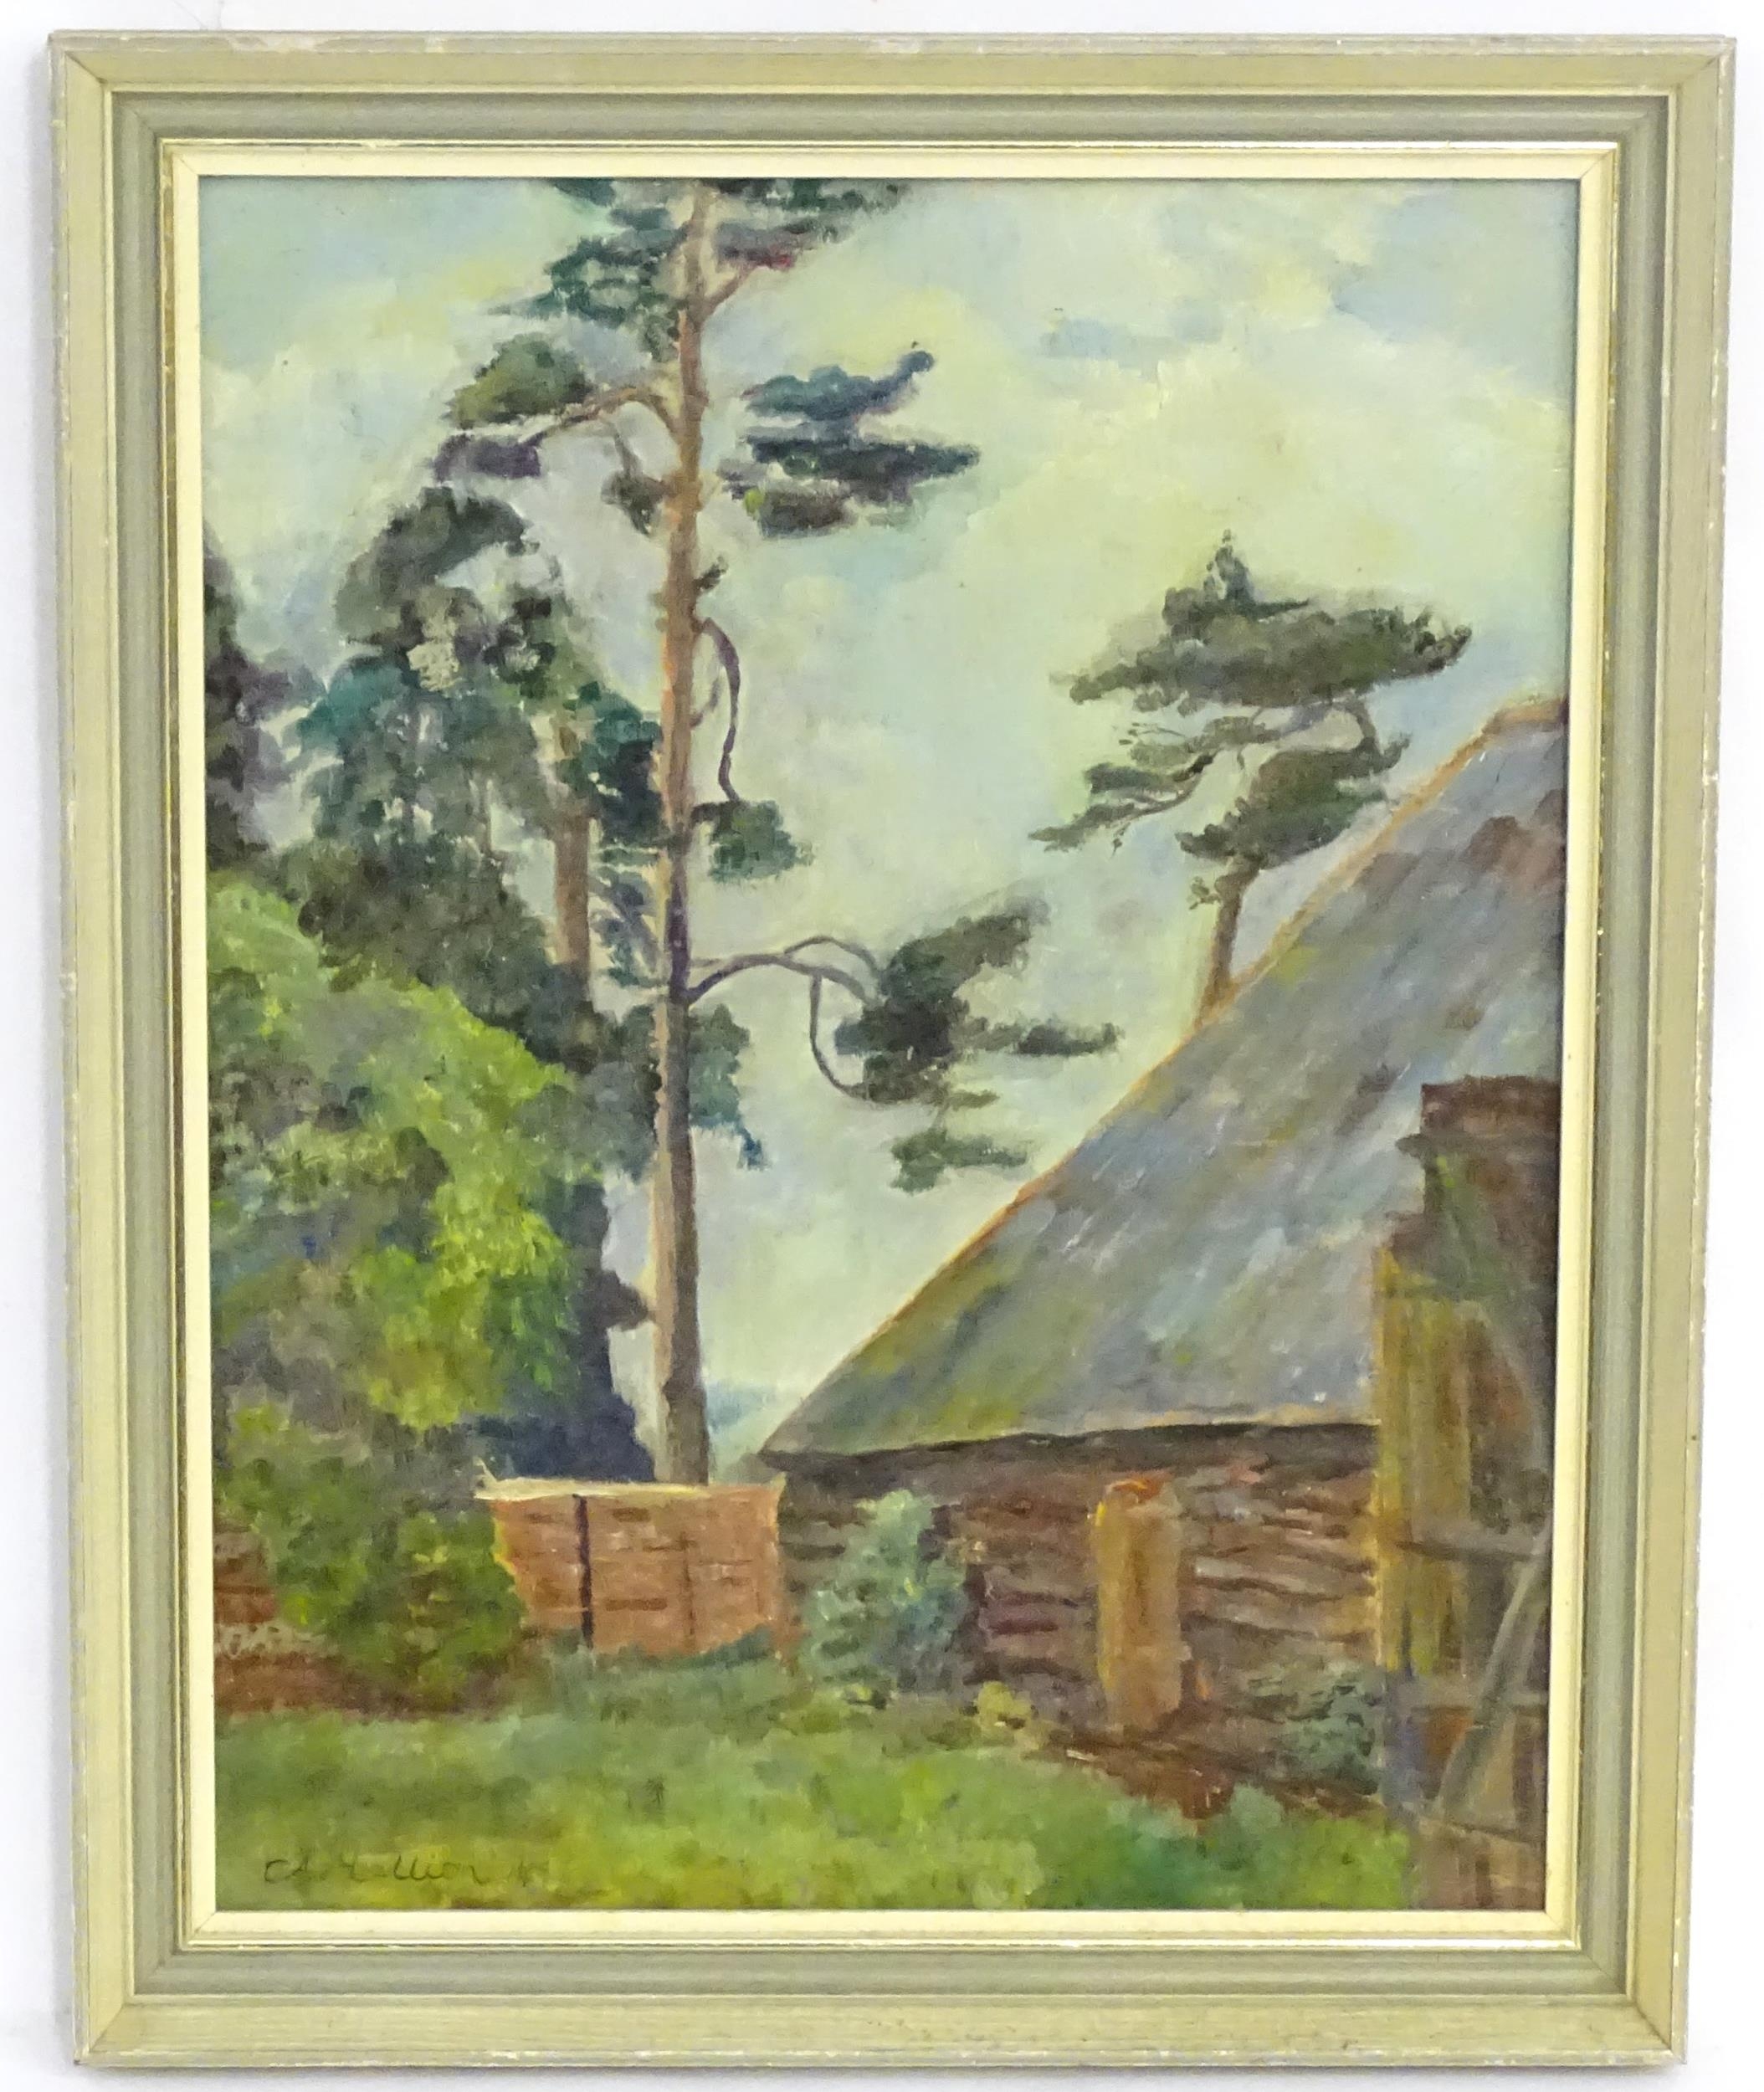 C. A. Mallion, 20th century, Oil on board, A study of a barn with trees. Signed and dated '74 - Image 3 of 4